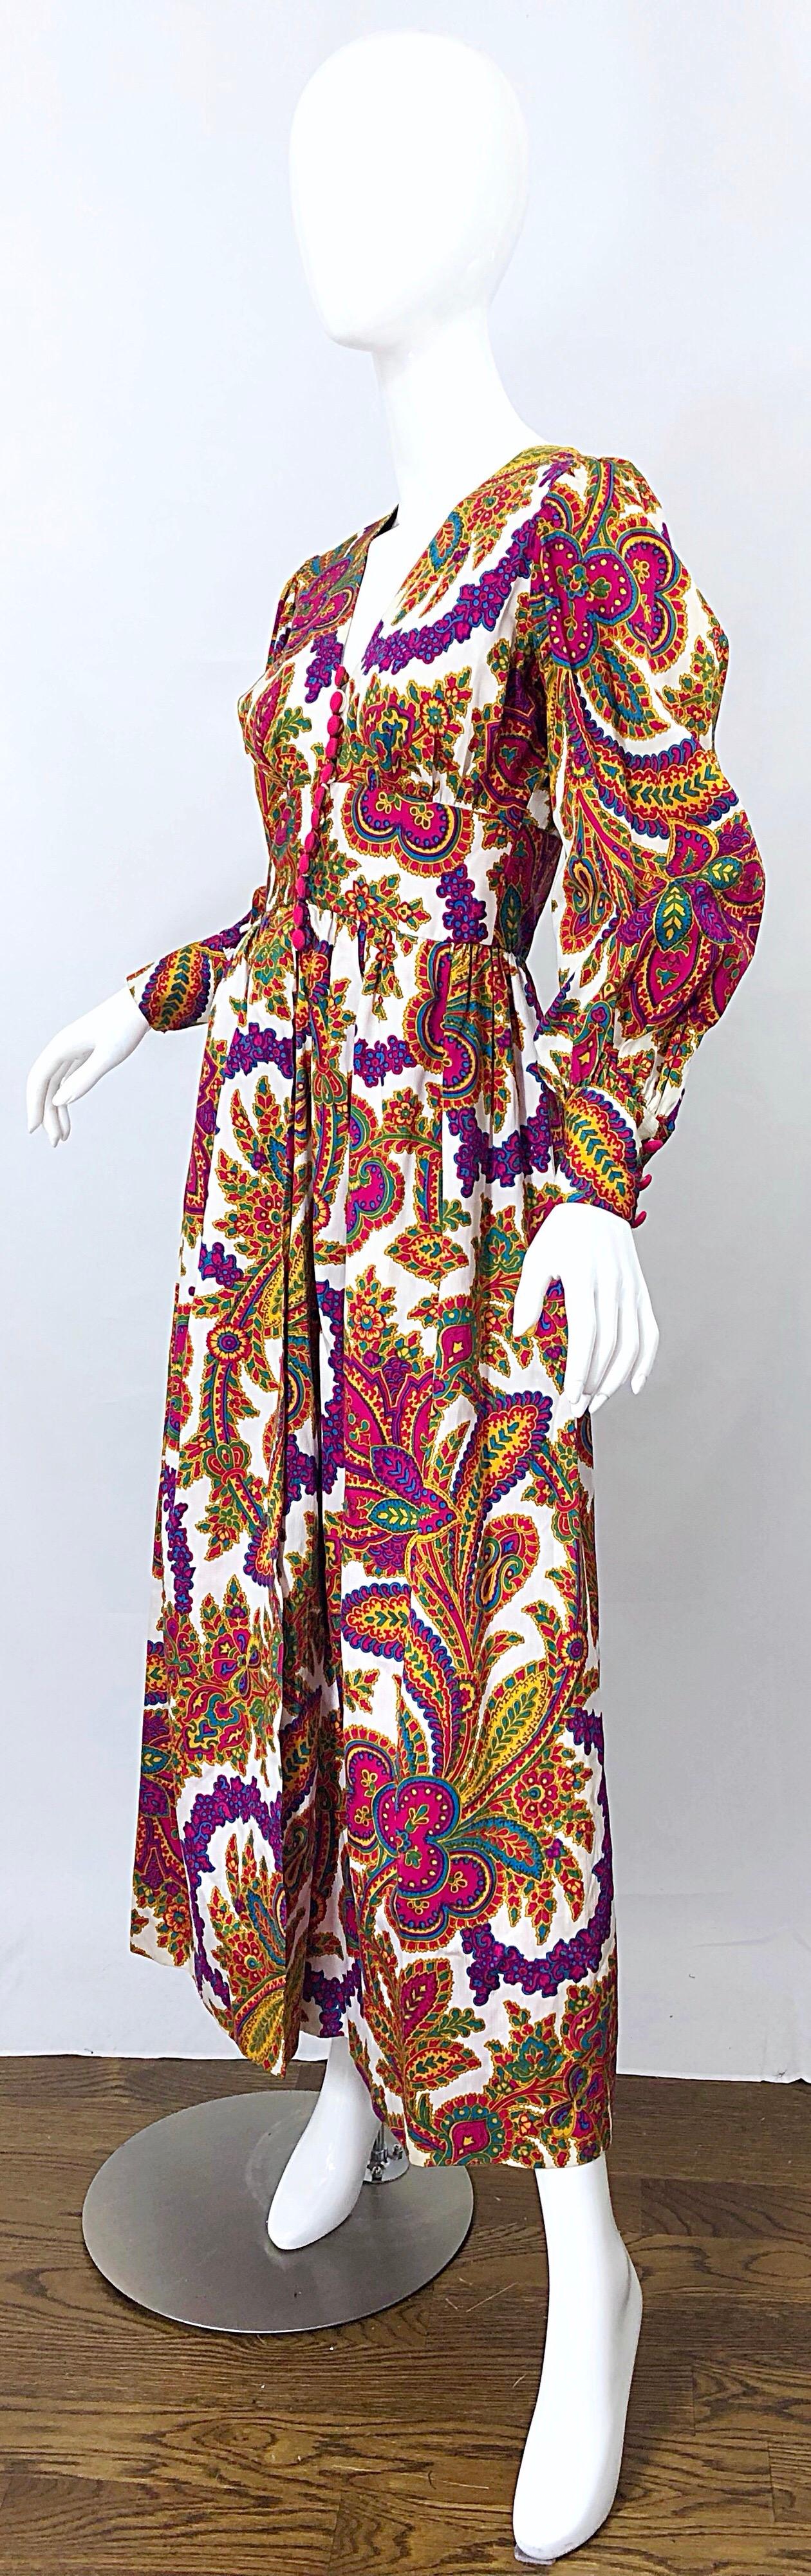 colorful 70s dress